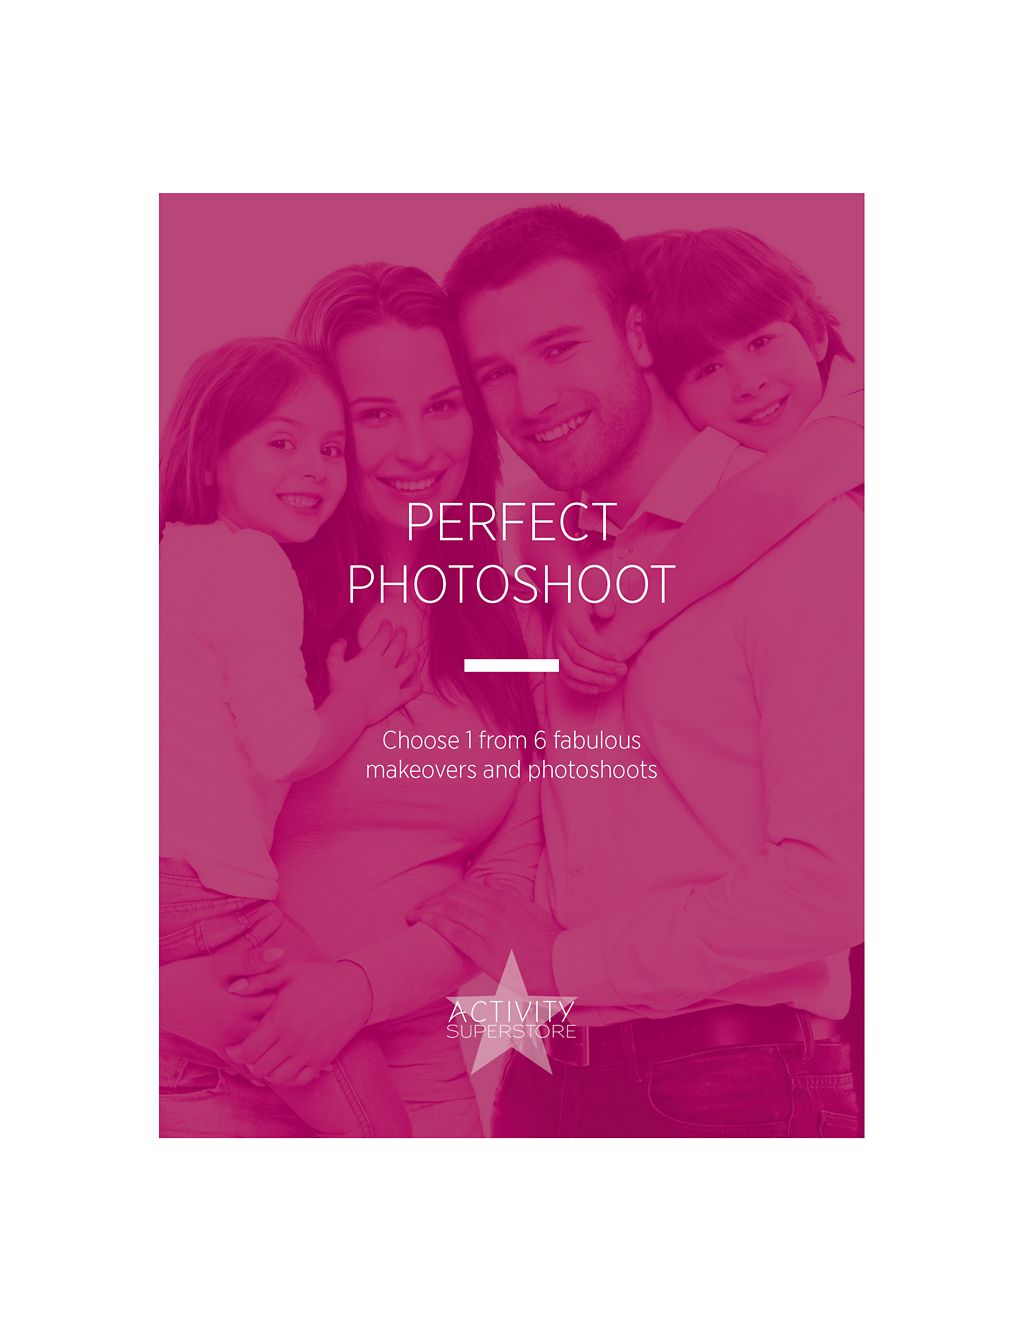 Perfect Photoshoot - Gift Experience Voucher 7 of 7